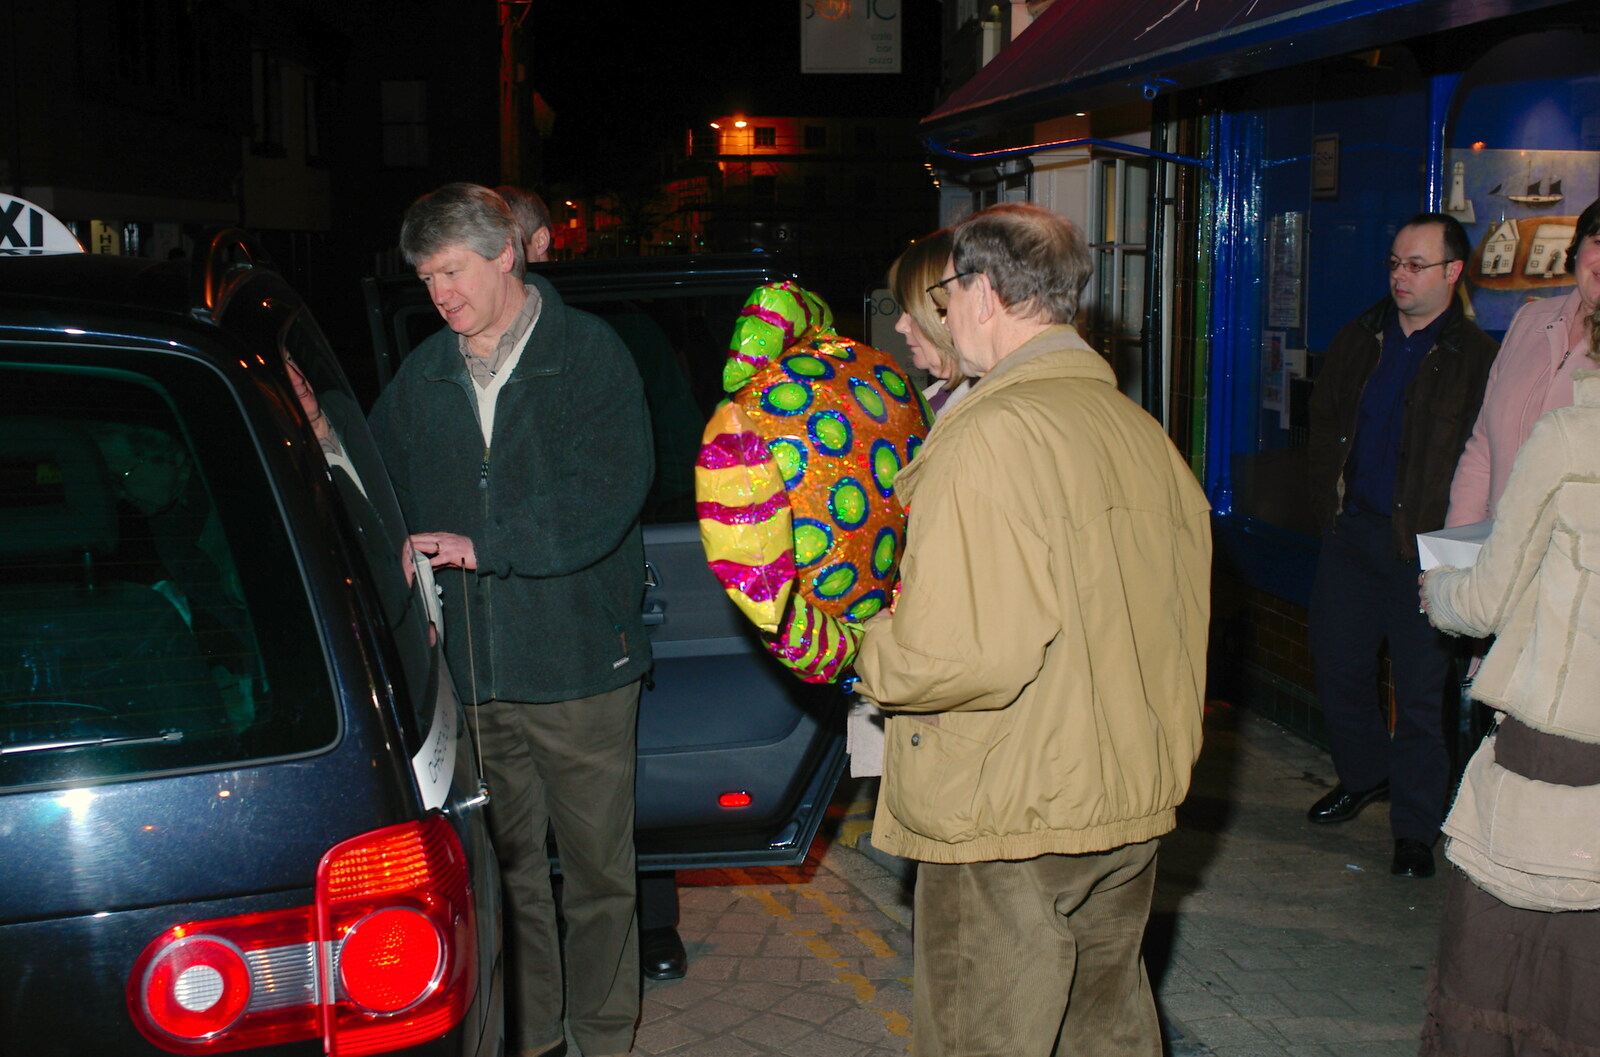 Mike carries his balloon to the taxi from Mike's 70th Birthday, Christchurch, Dorset - 12th March 2005